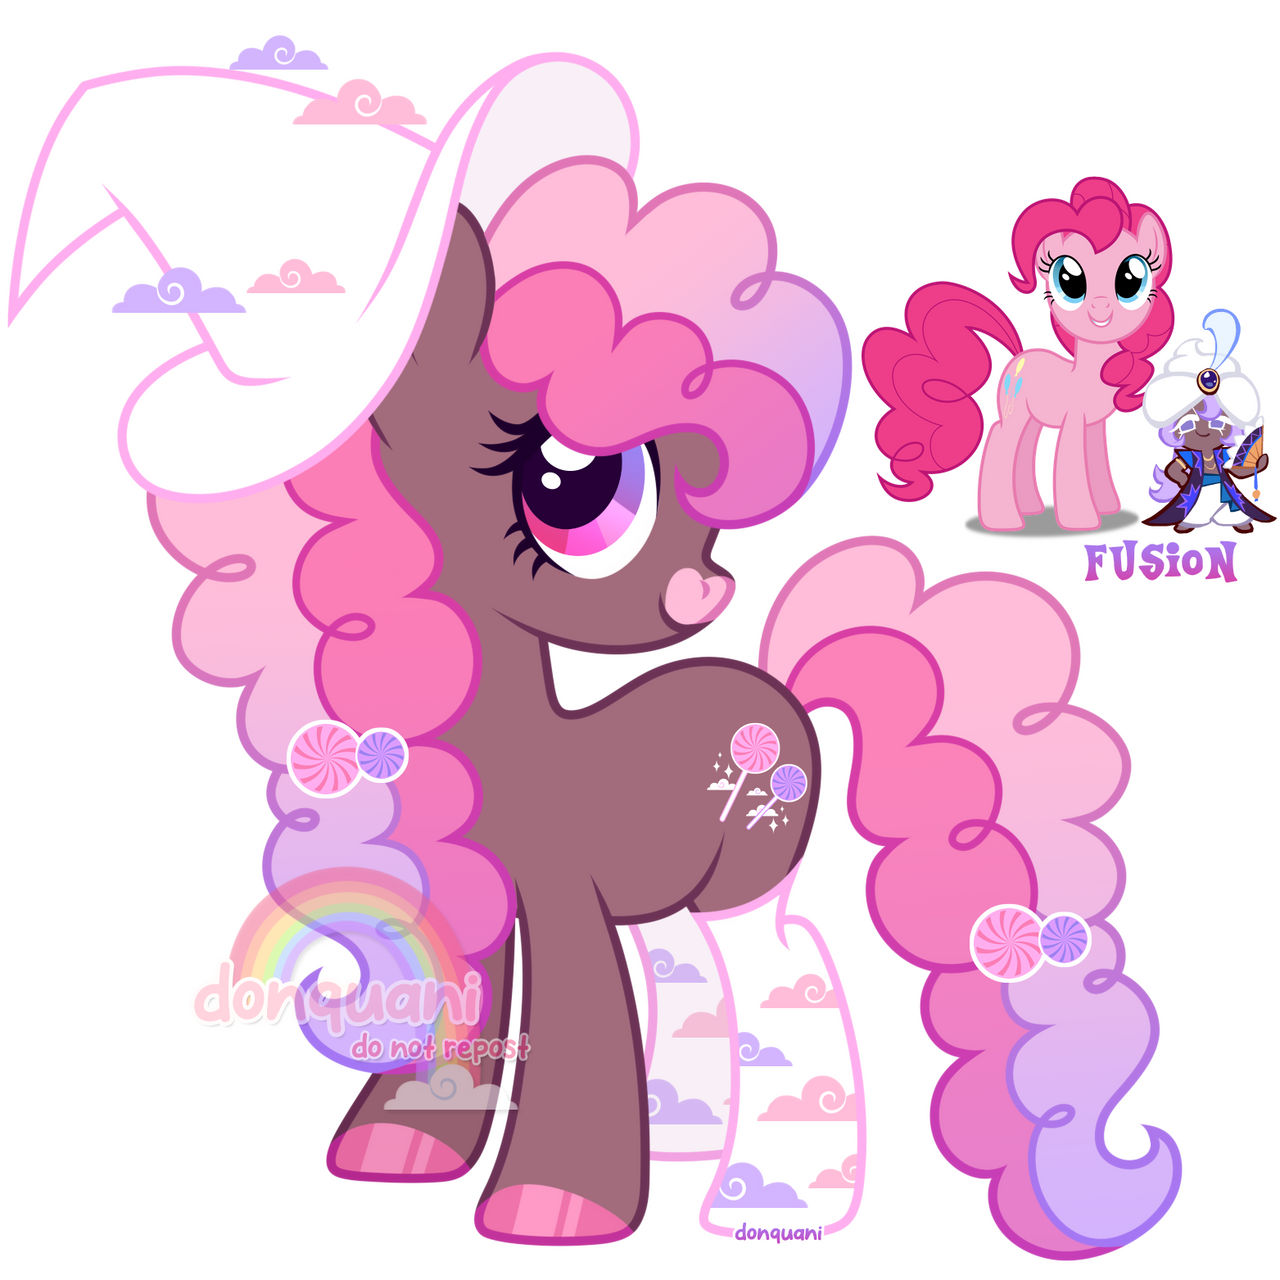 [MLP + Cookie Run] Fusion by donquani on DeviantArt